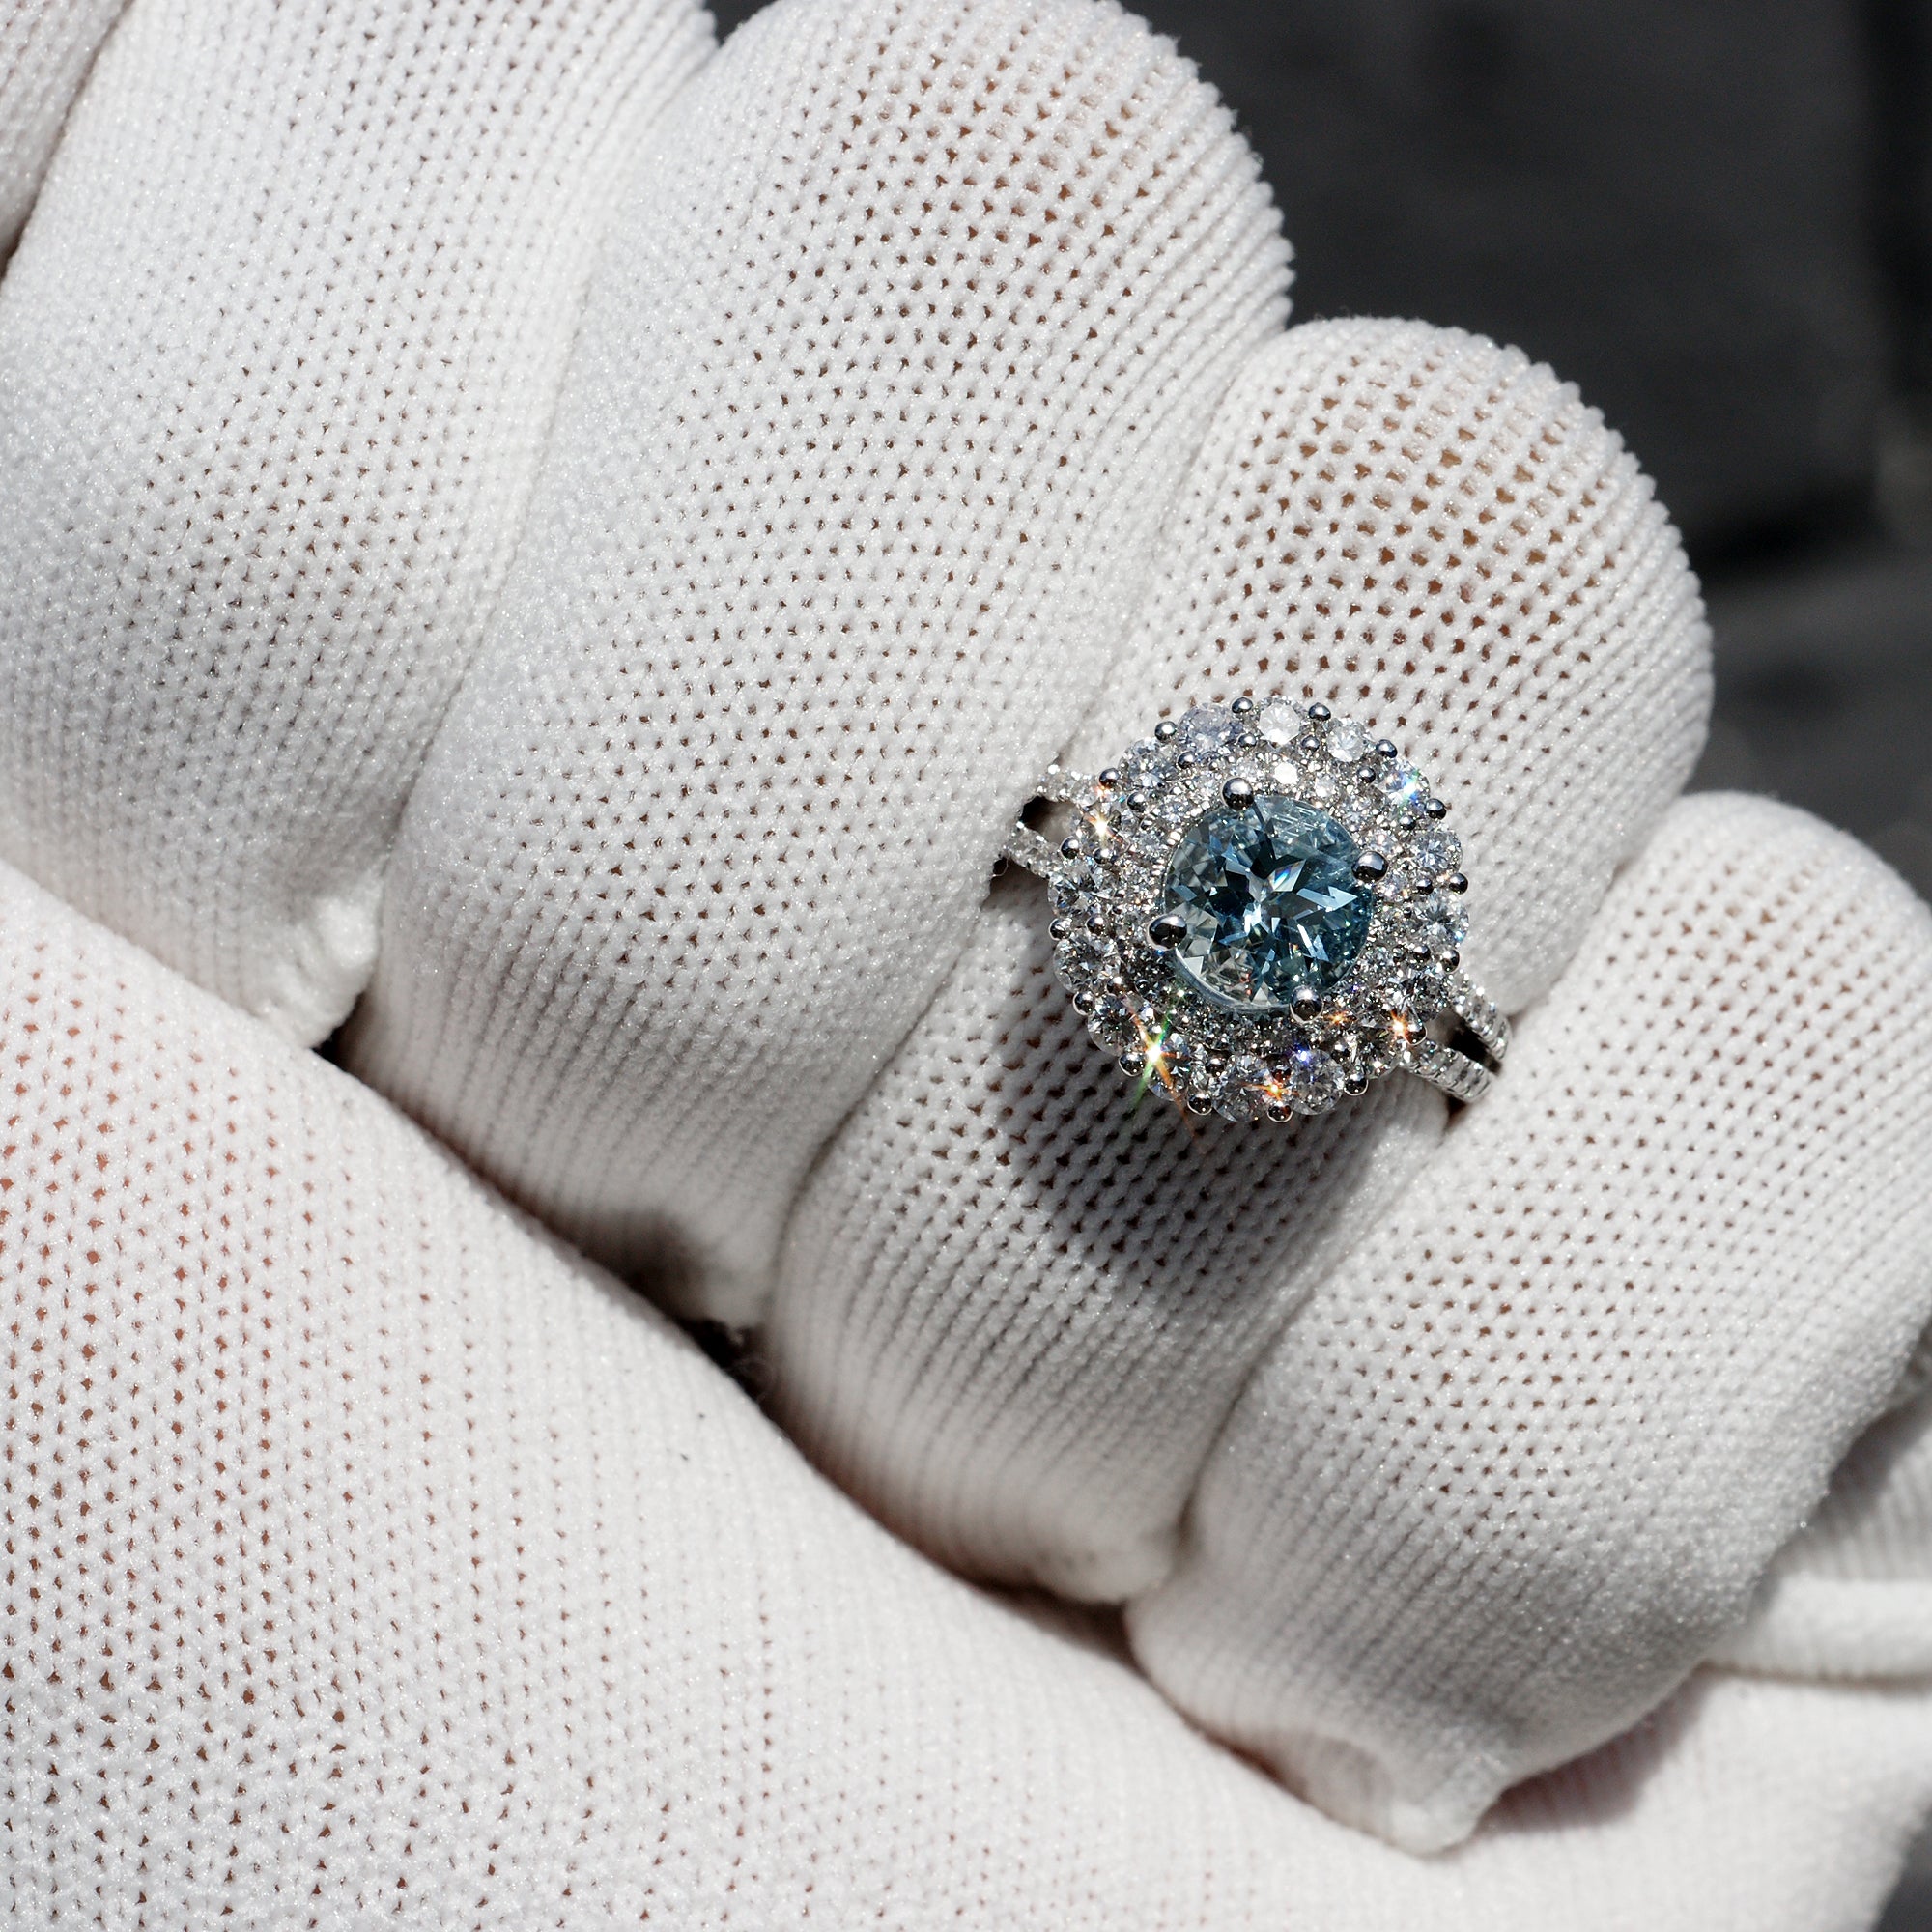 Aquamarine ring with double diamond halo and split band in 18k white gold 7mm by samNsue